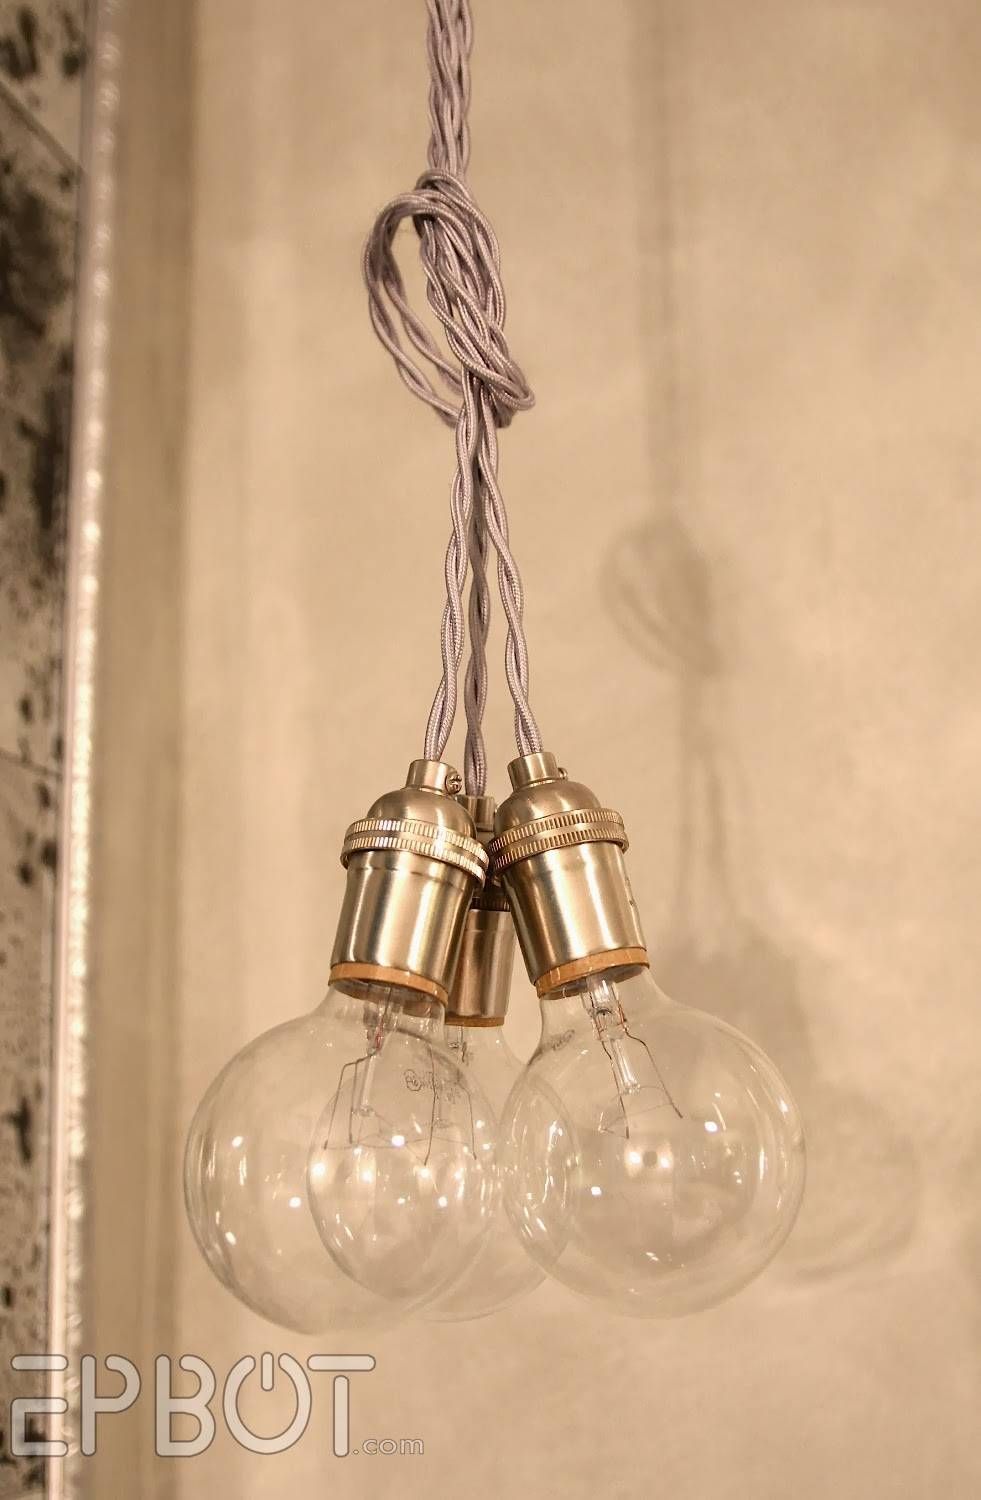 Epbot: Wire Your Own Pendant Lighting – Cheap, Easy, & Fun! Inside Homemade Pendant Lights (View 9 of 15)